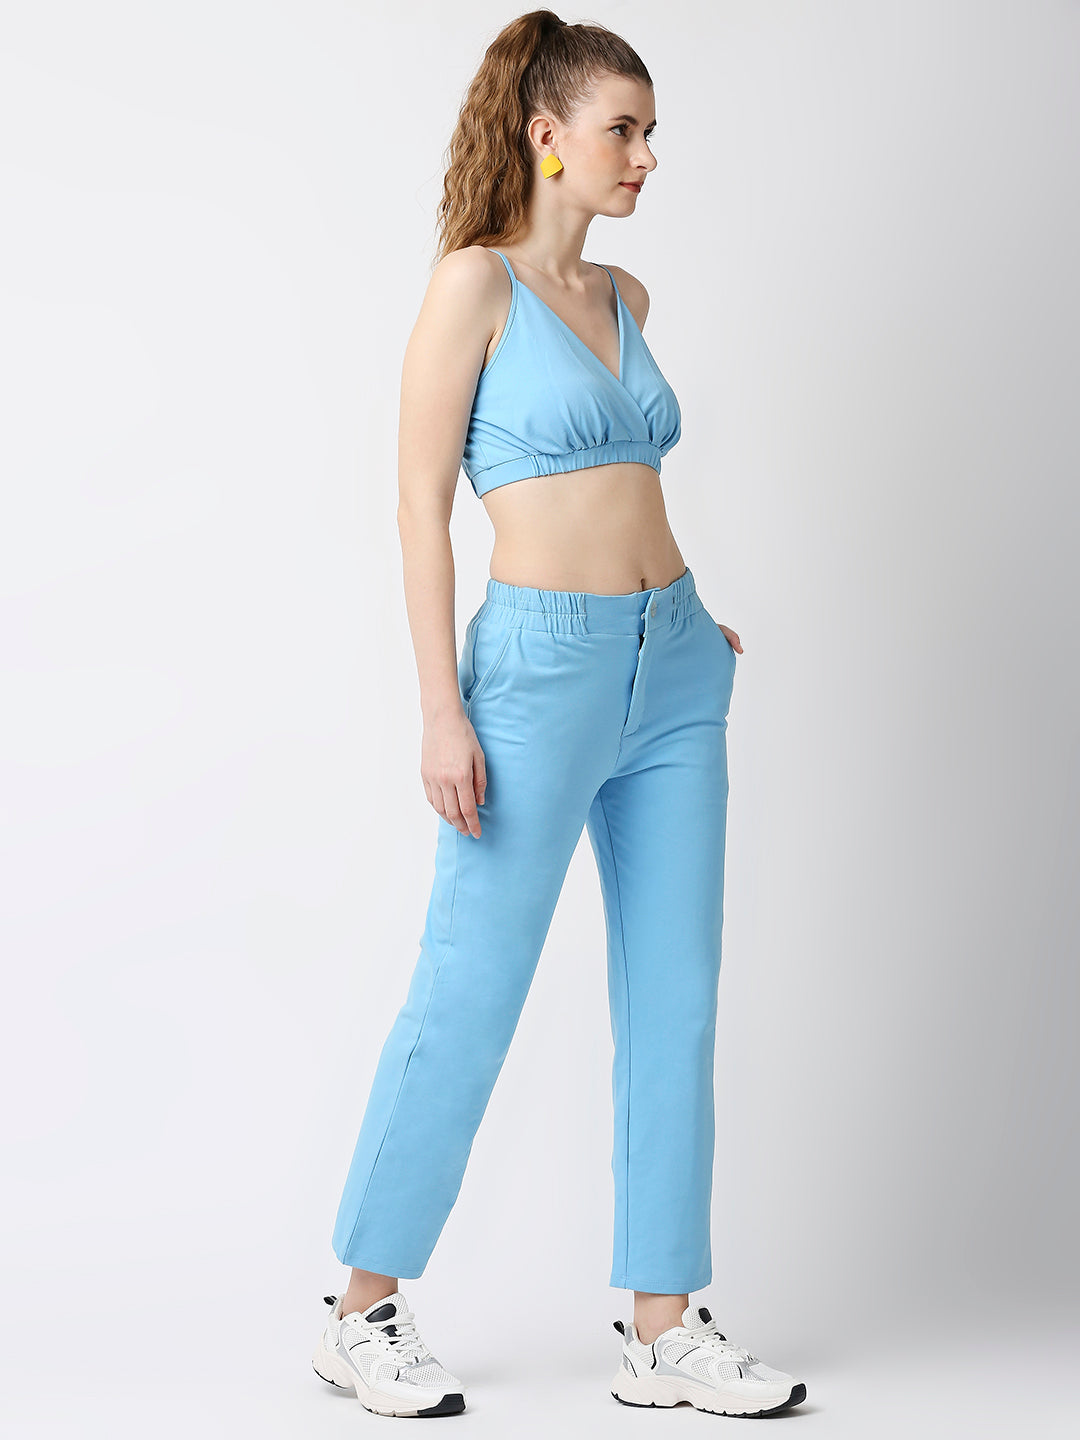 Disrupt Women Blue Straight Pants With Bralette Crop Top Co-rd Set (2pc)